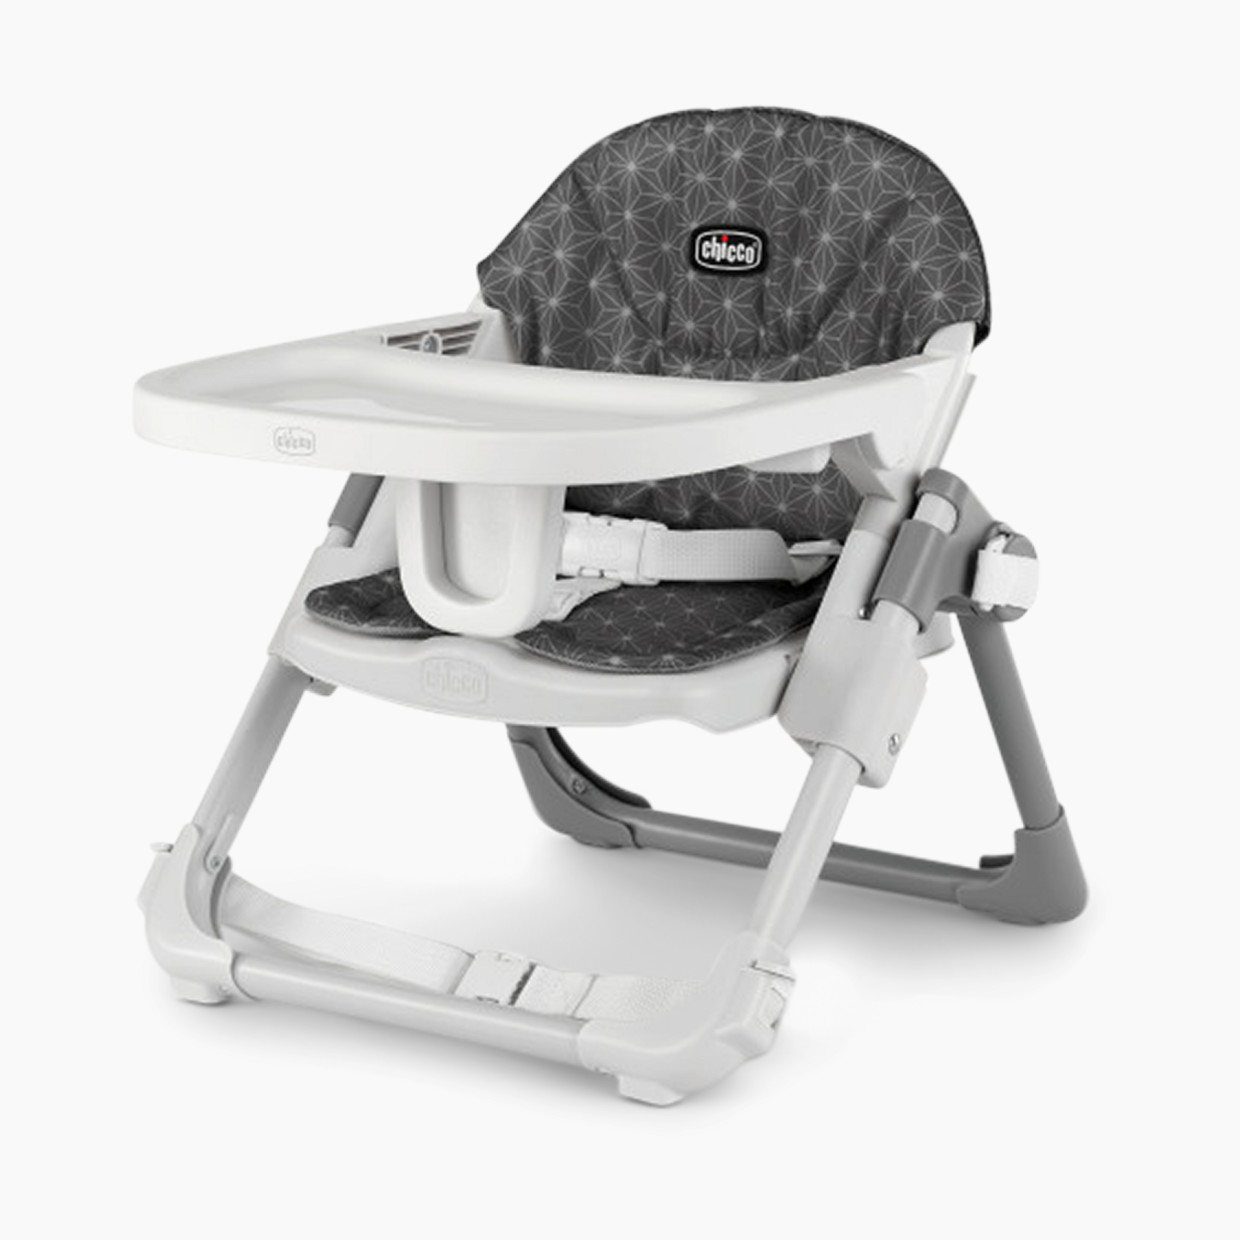 Chicco Take-A-Seat Booster Seat - Grey Star.